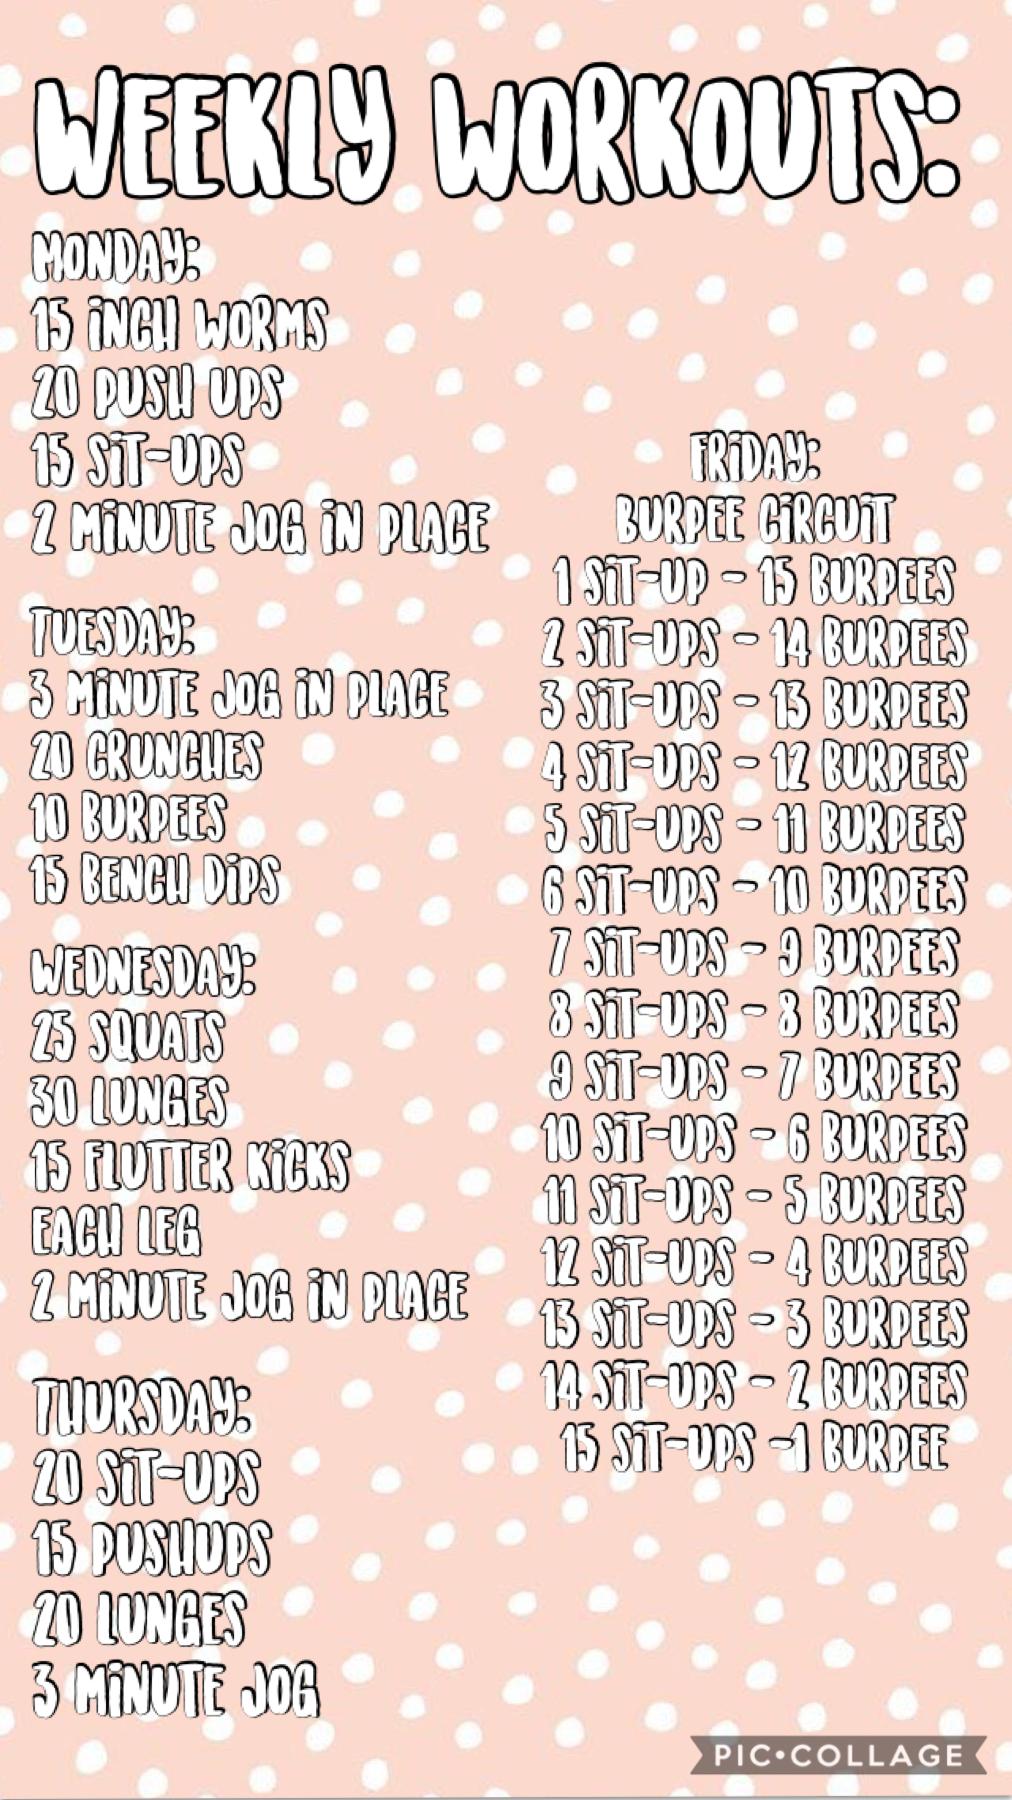 Sry I have not been active I turned off my notifications for this app and completely forgot about it 😂 but here are some workouts for this week! Enjoy everyone! 💕Like and come t if u have any suggestions!💛